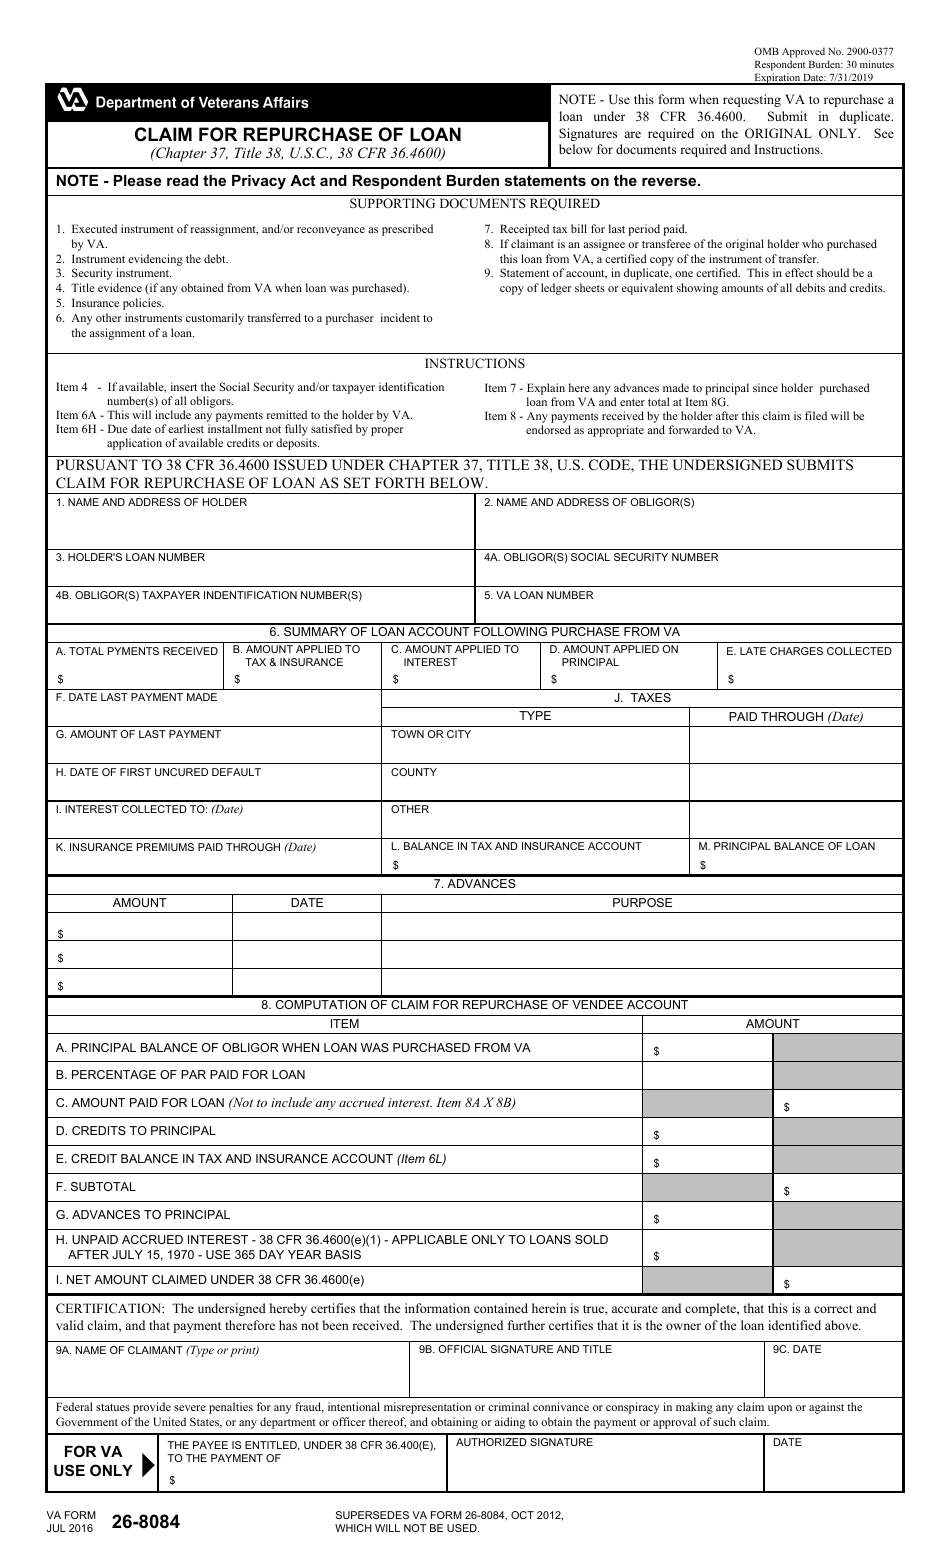 VA Form 26-8084 Claim for Repurchase of Loan, Page 1